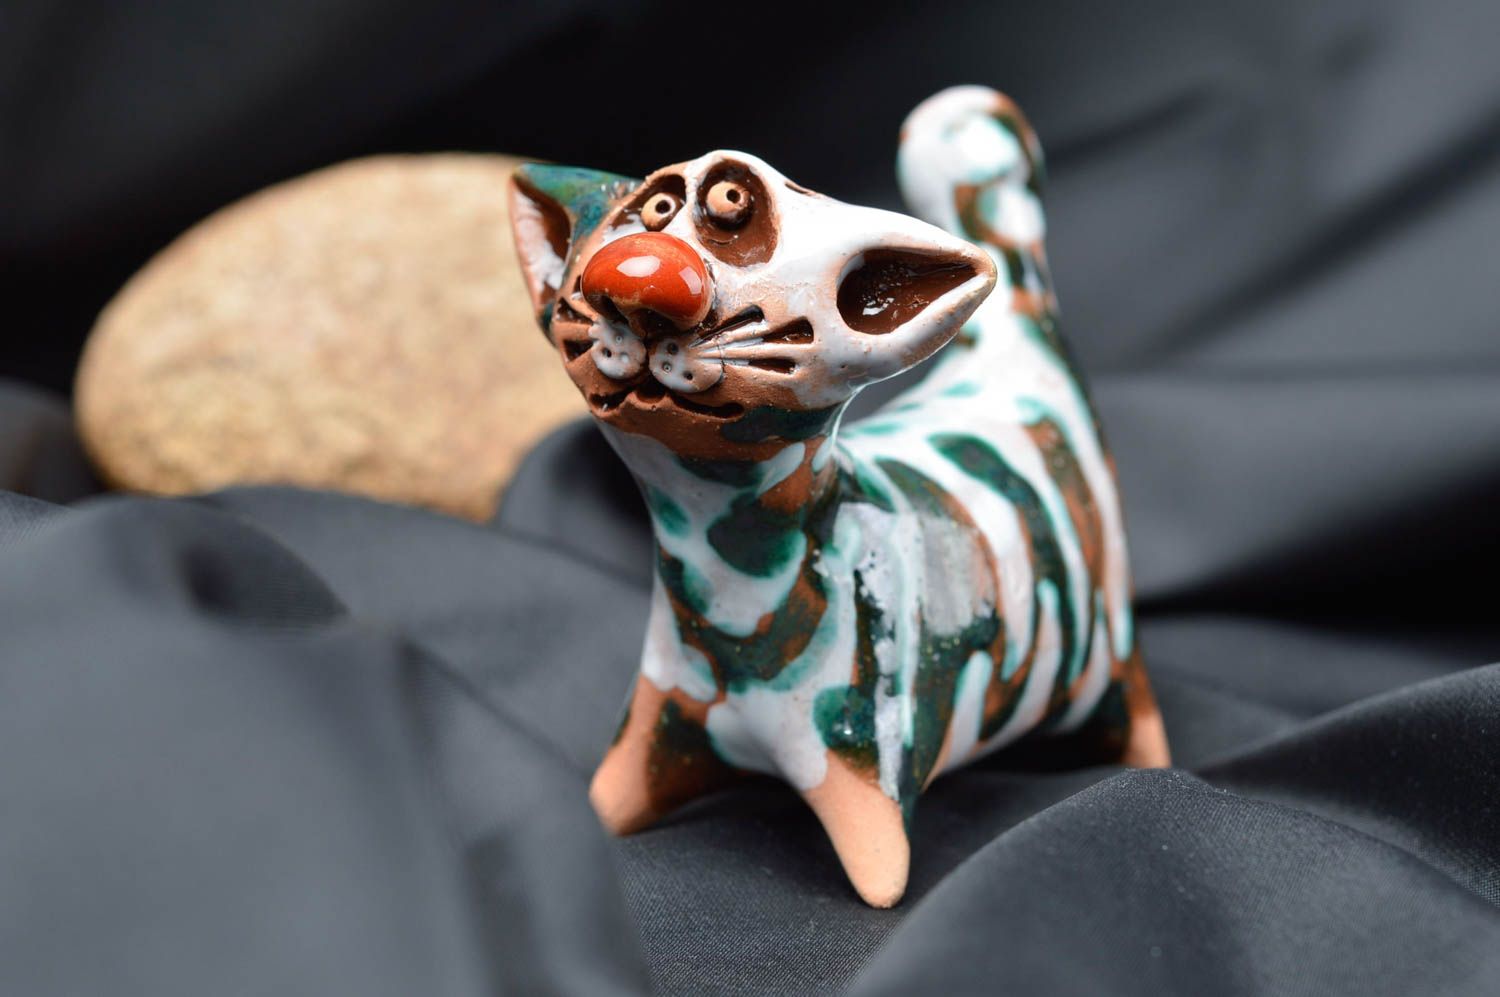 Homemade home decor ceramic figurine cat figurines gifts for cat lovers photo 1